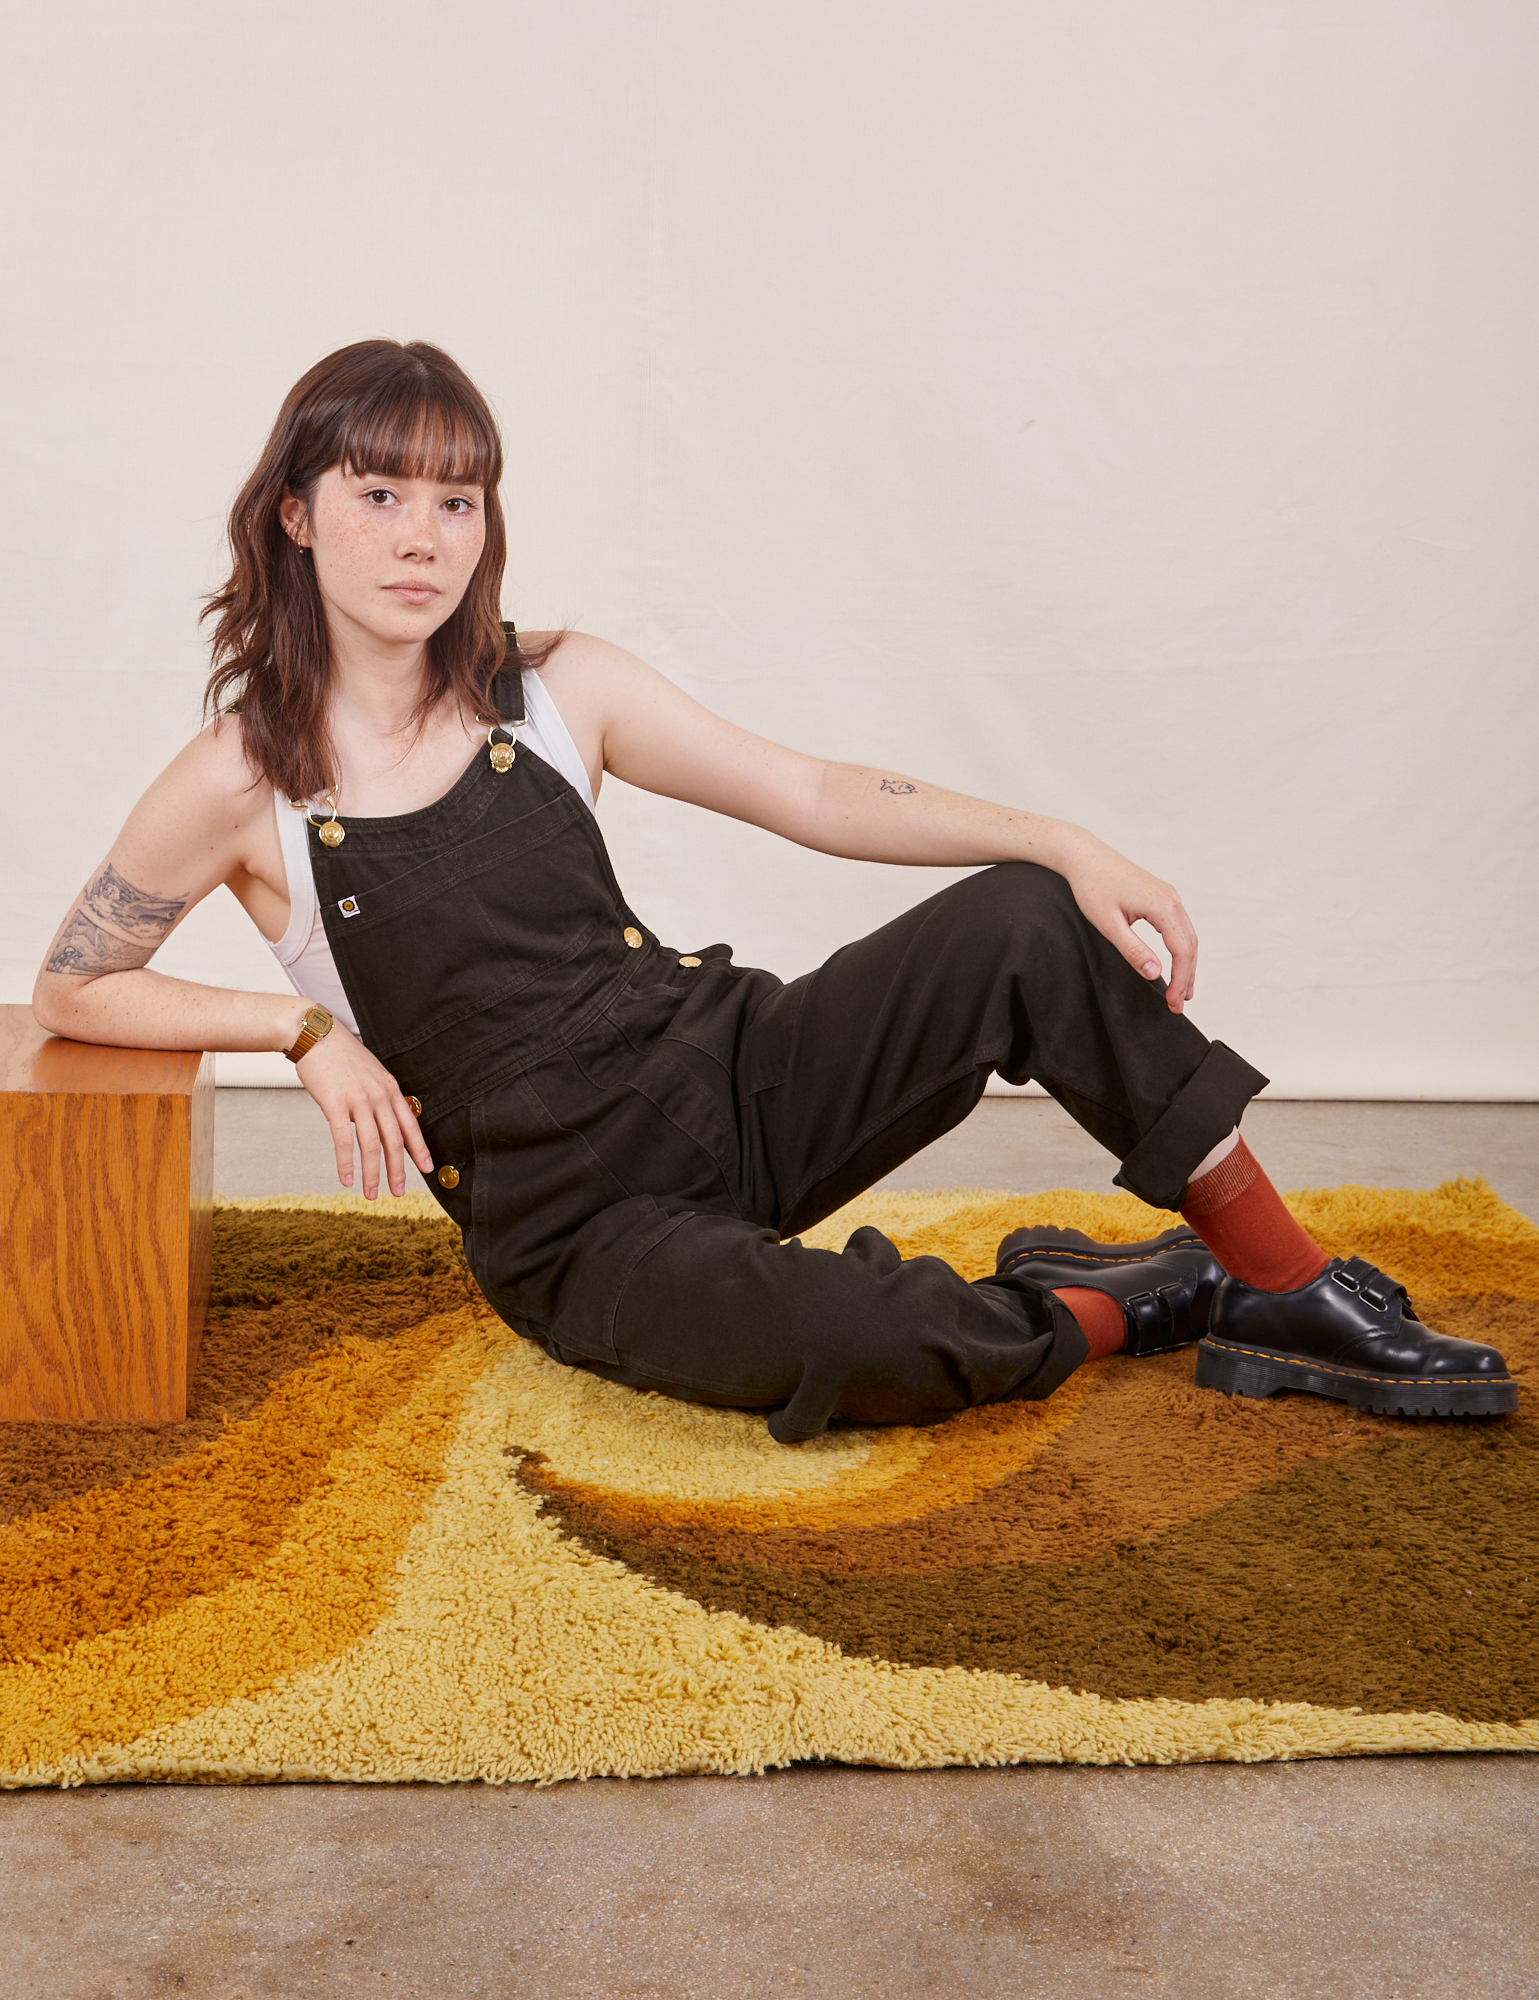 Hana is wearing Original Overalls in Mono Espresso with a vintage off-white Cropped Tank Top underneath.